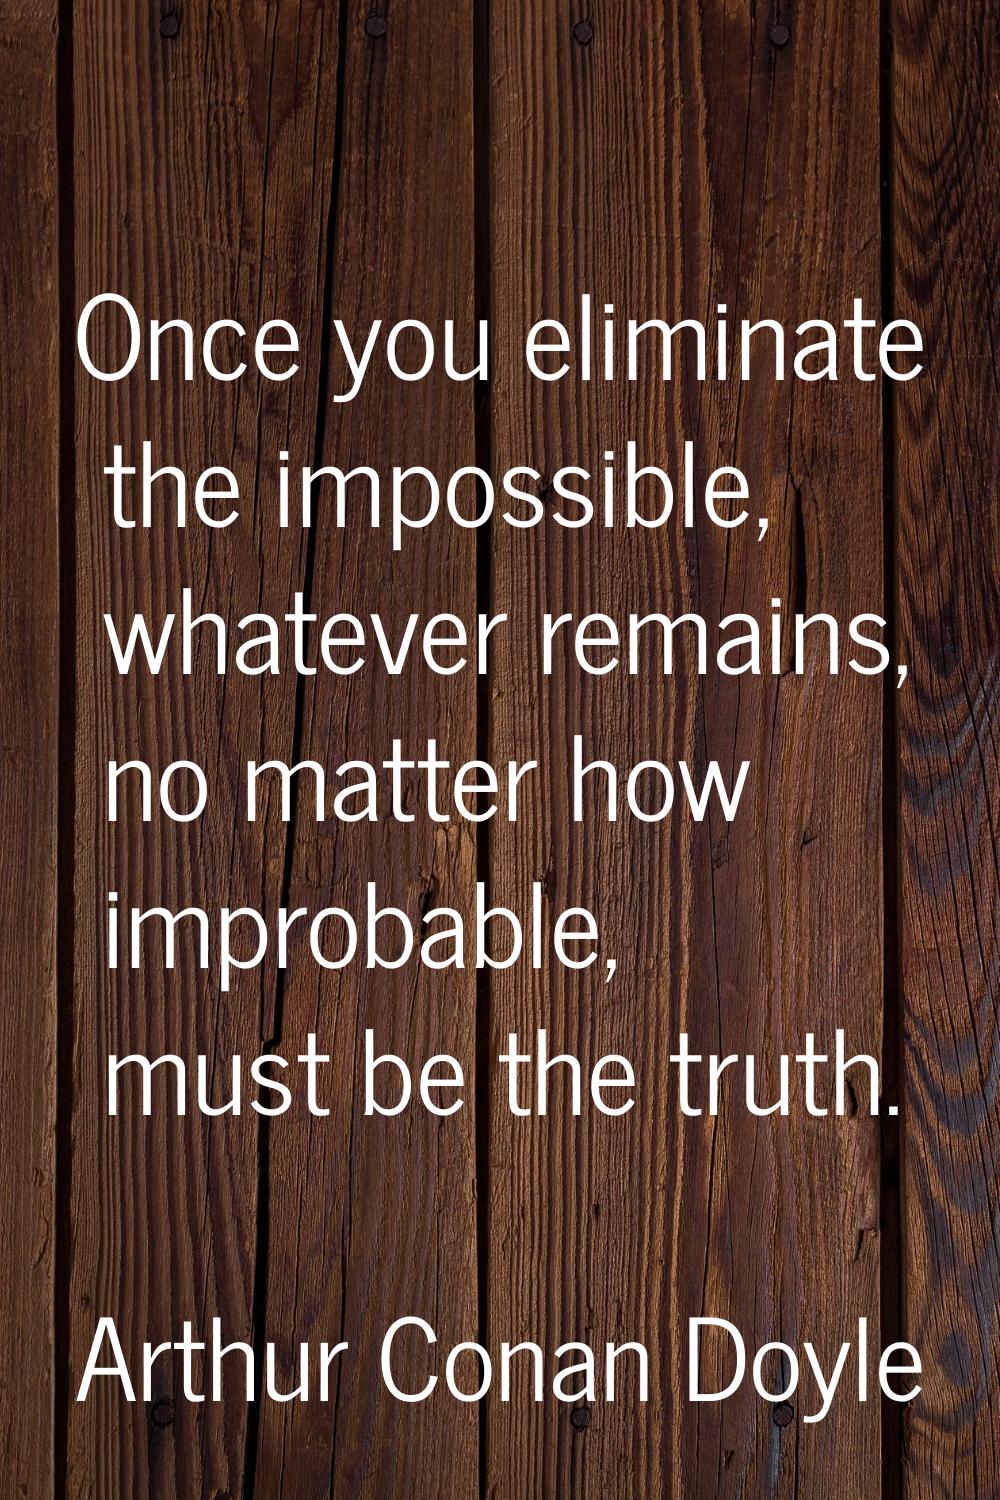 Once you eliminate the impossible, whatever remains, no matter how improbable, must be the truth.